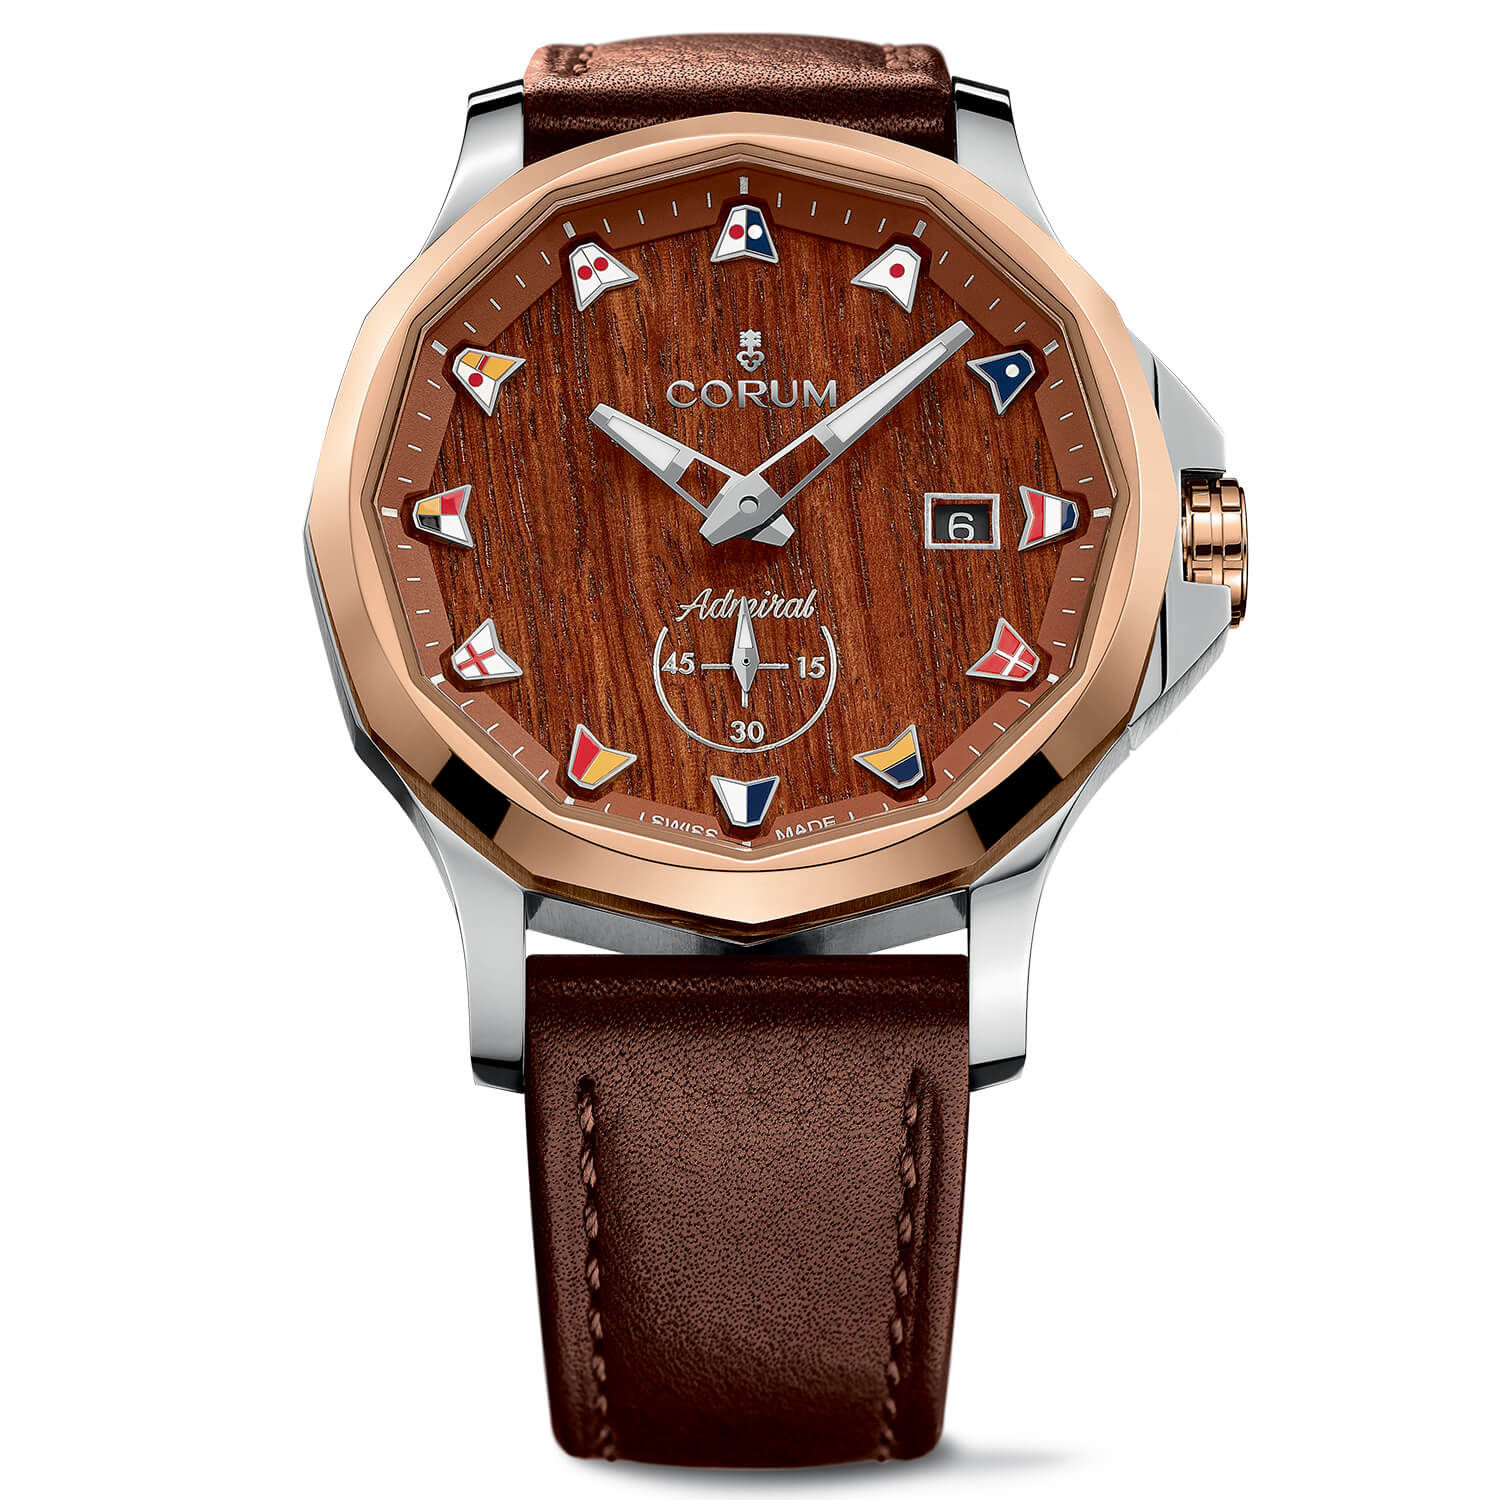 Admiral Legend 42 with wood dial